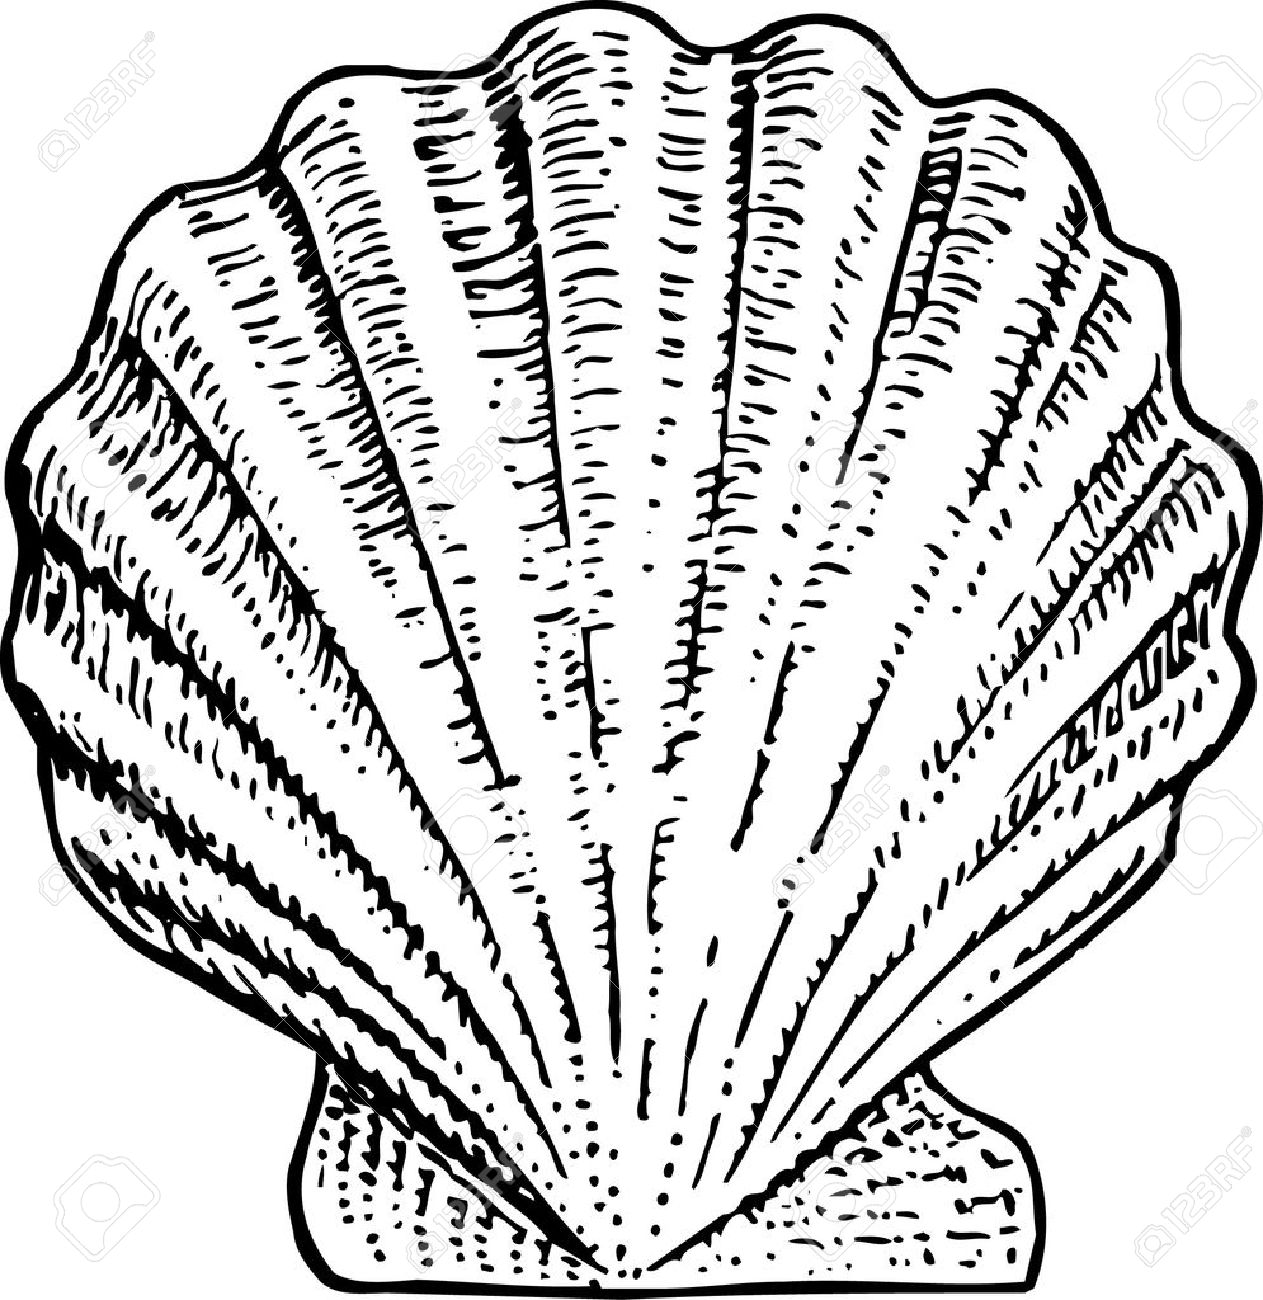 Scallop clipart #11, Download drawings